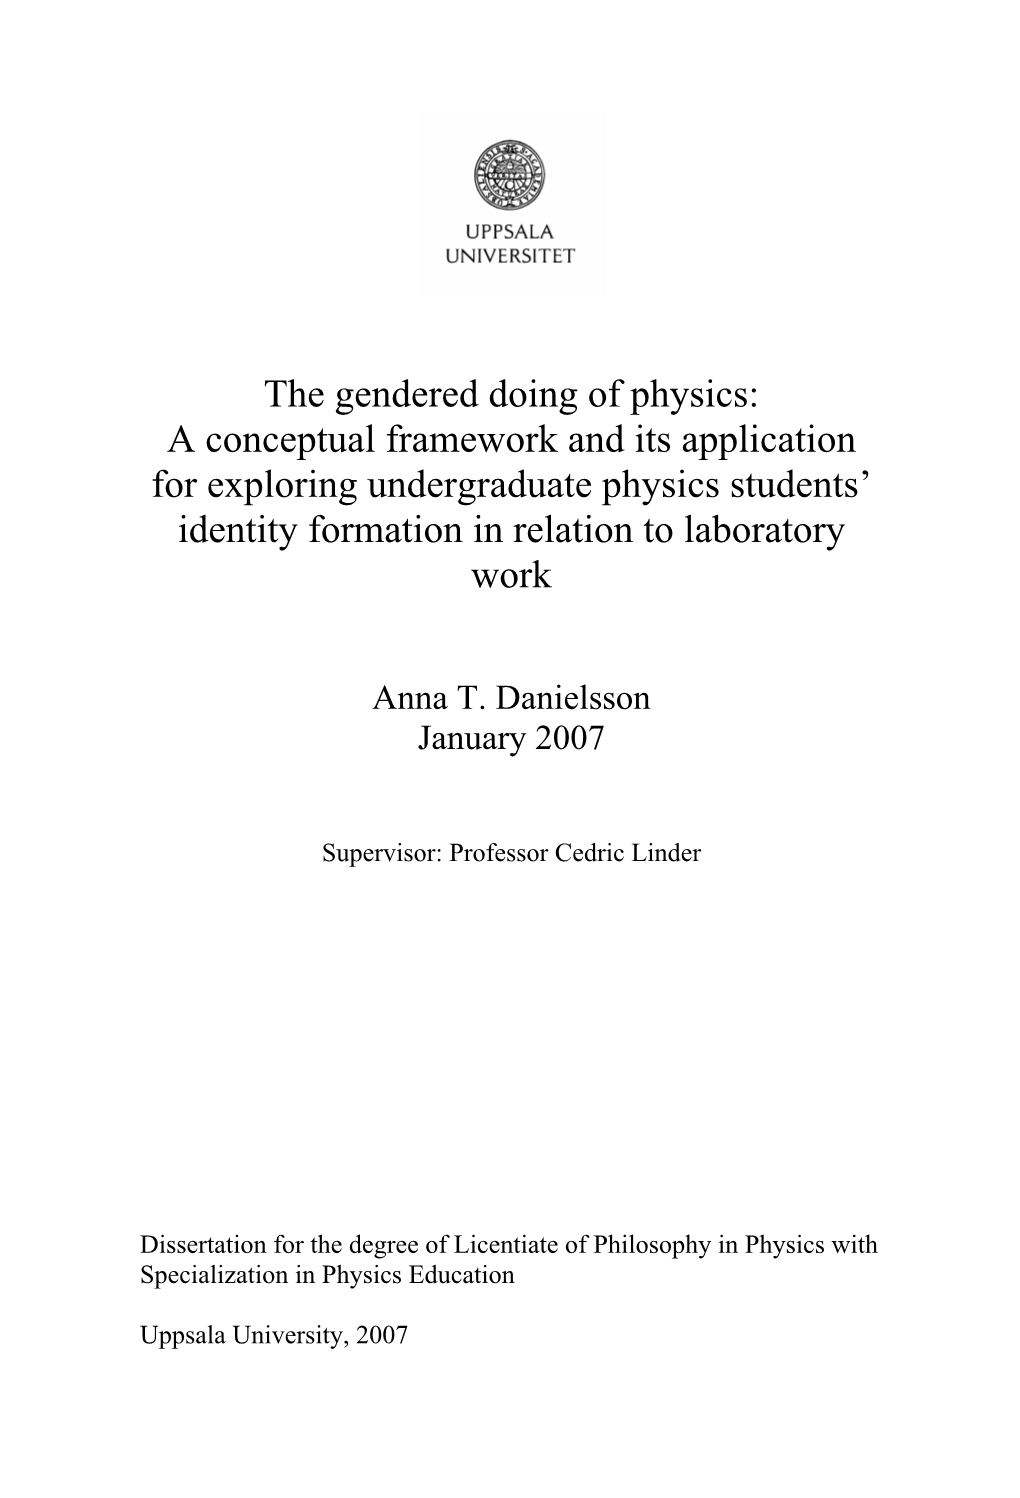 A Conceptual Framework and Its Application for Exploring Undergraduate Physics Students’ Identity Formation in Relation to Laboratory Work